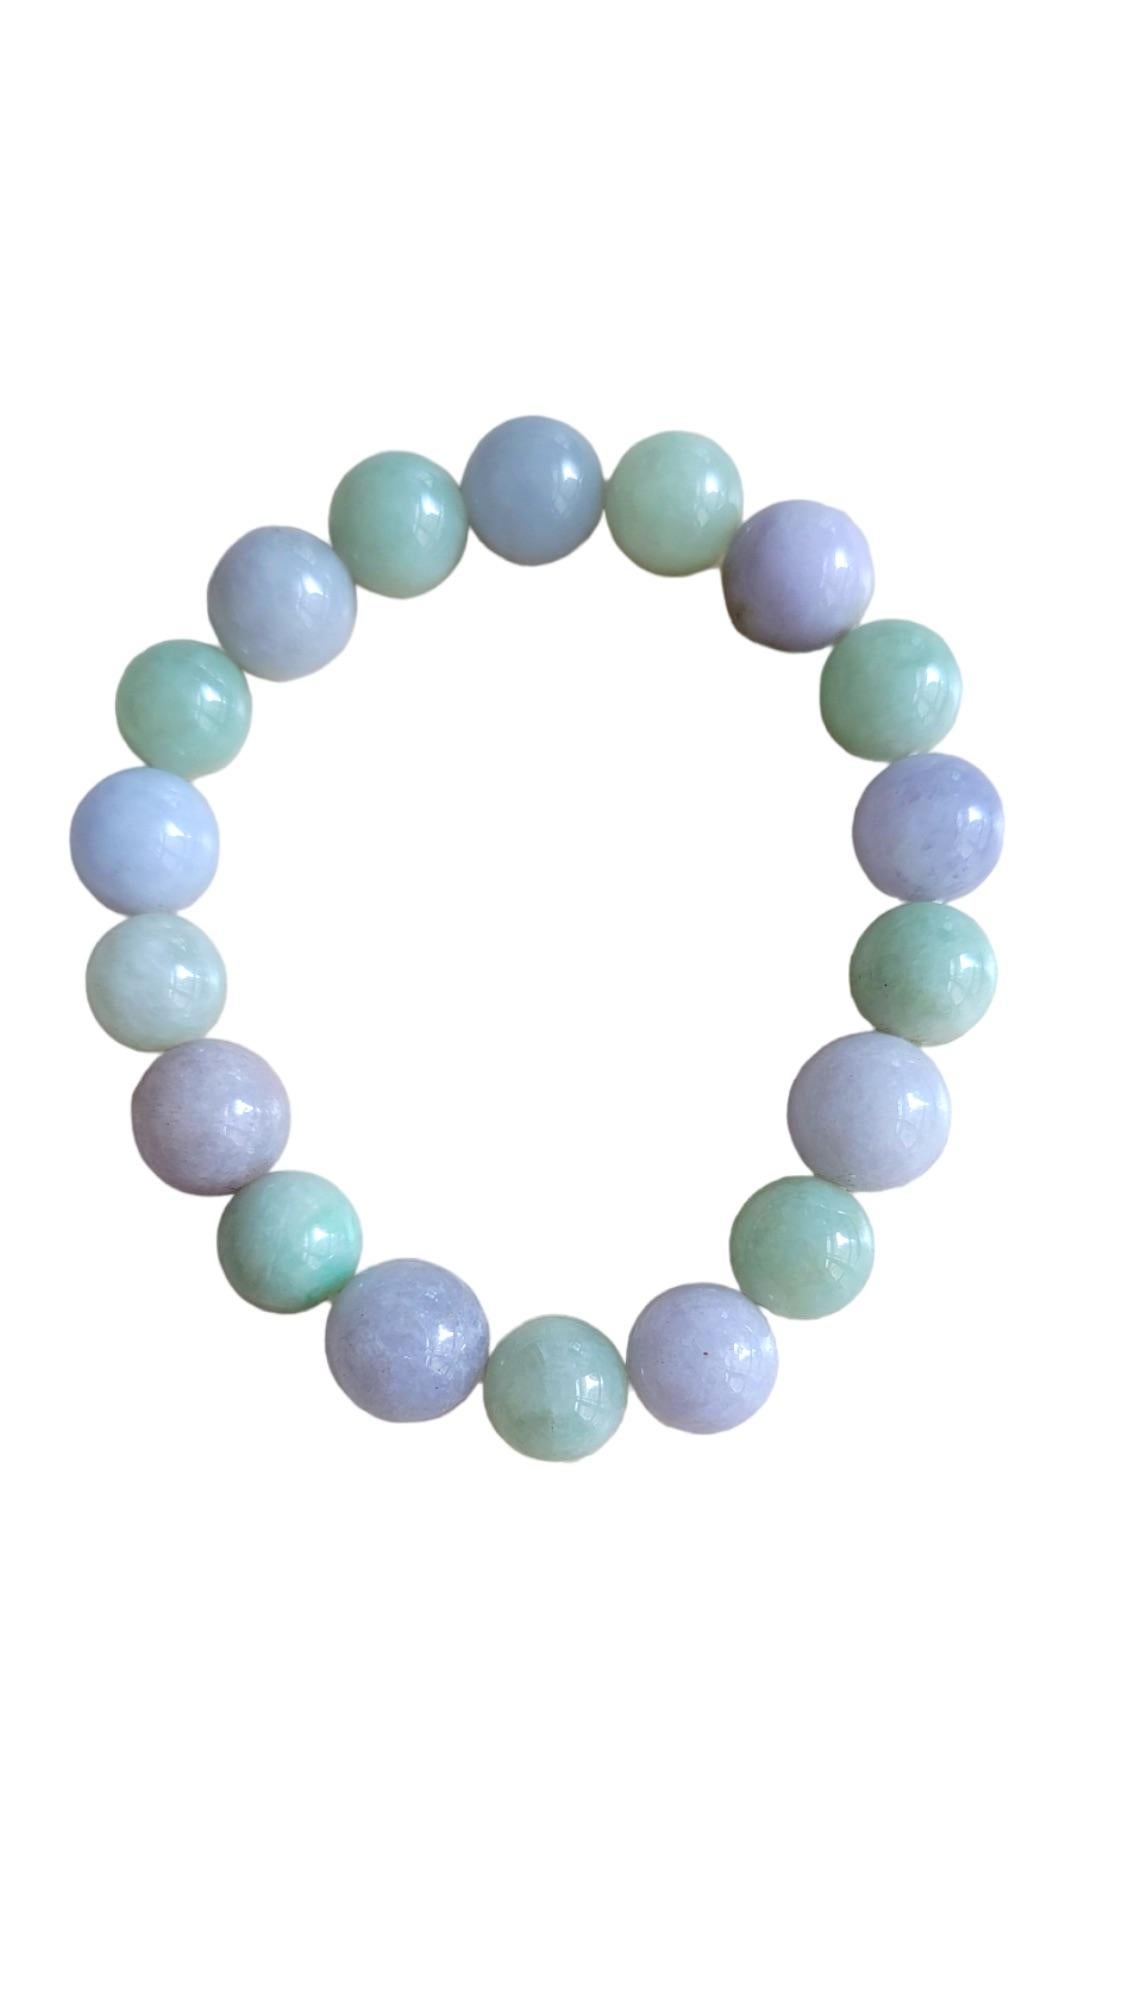 Ball Cut Imperial Green and Lavender Burmese A-Jade Beaded Bracelet (11mm Each) 07002 For Sale